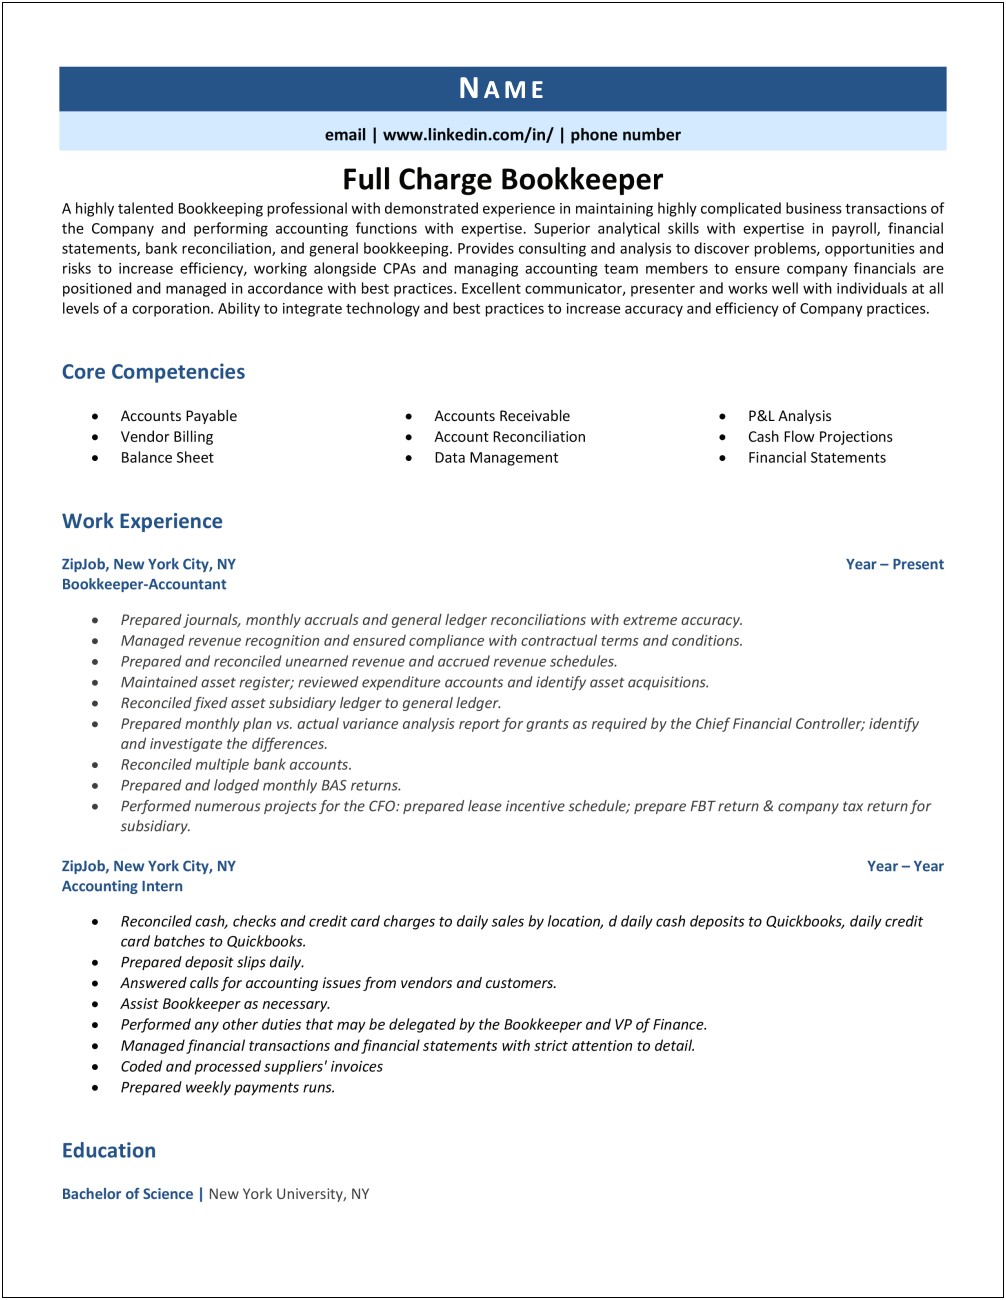 Resume Summary For Full Charge Bookkeeper